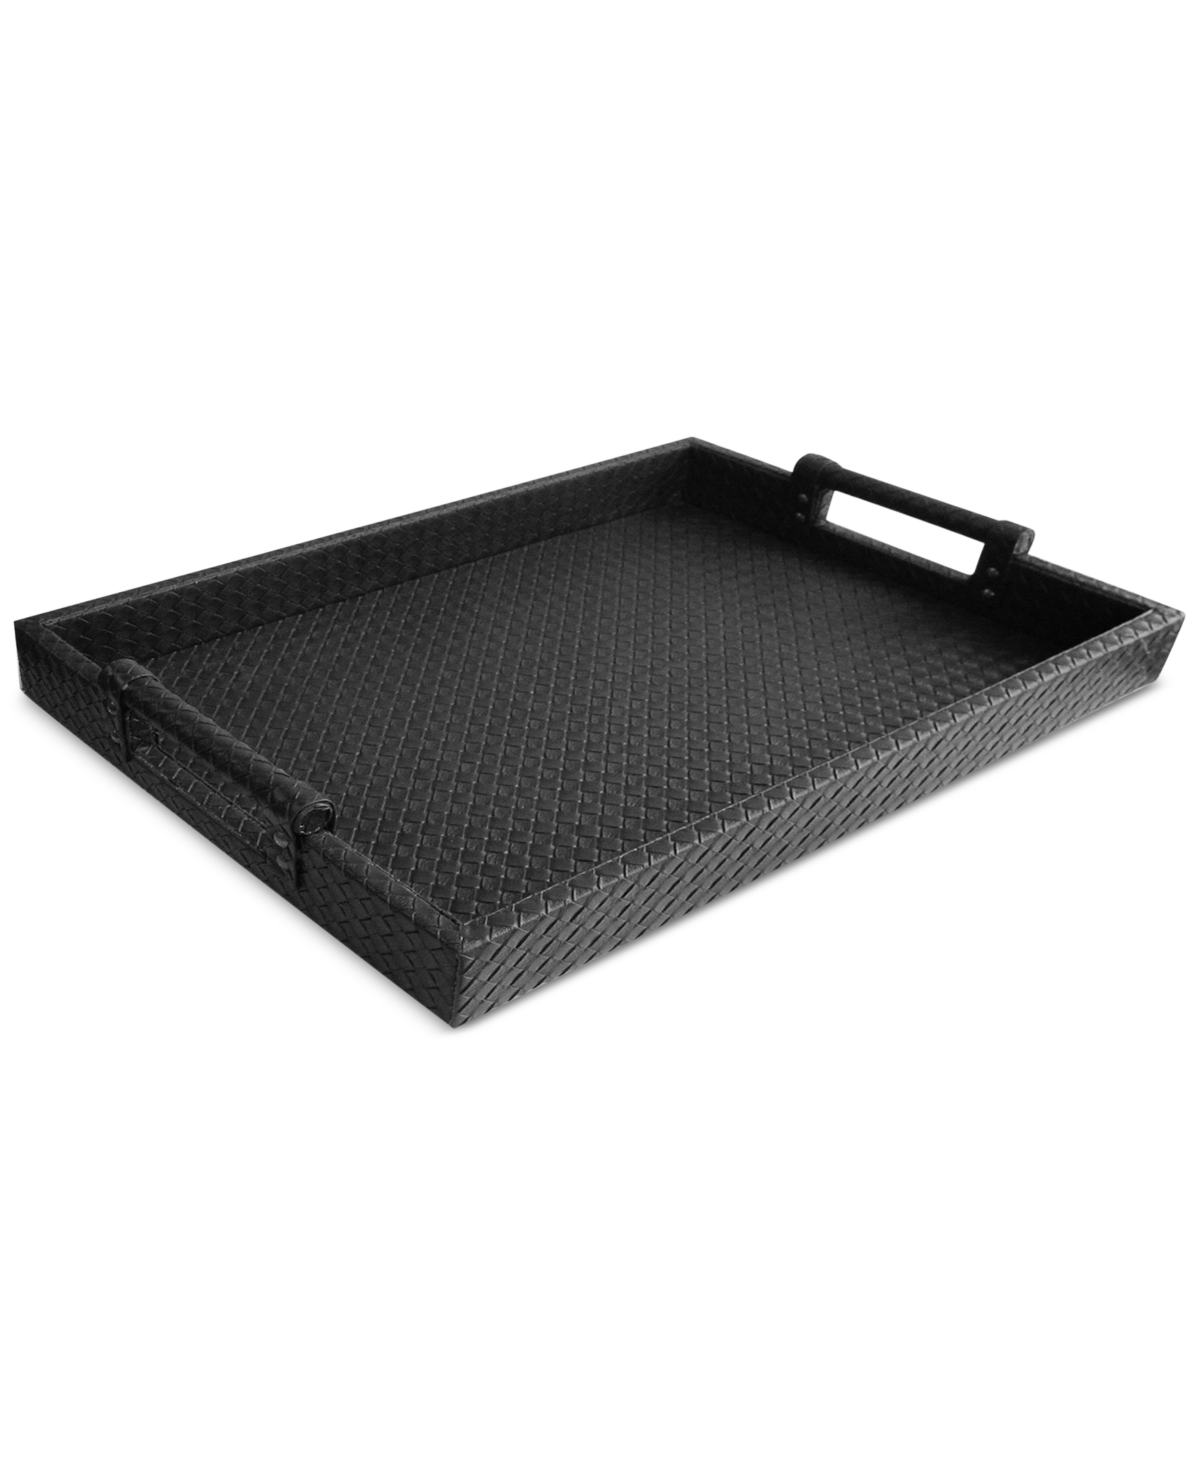 Jay Imports Woven Leather Tray In Black